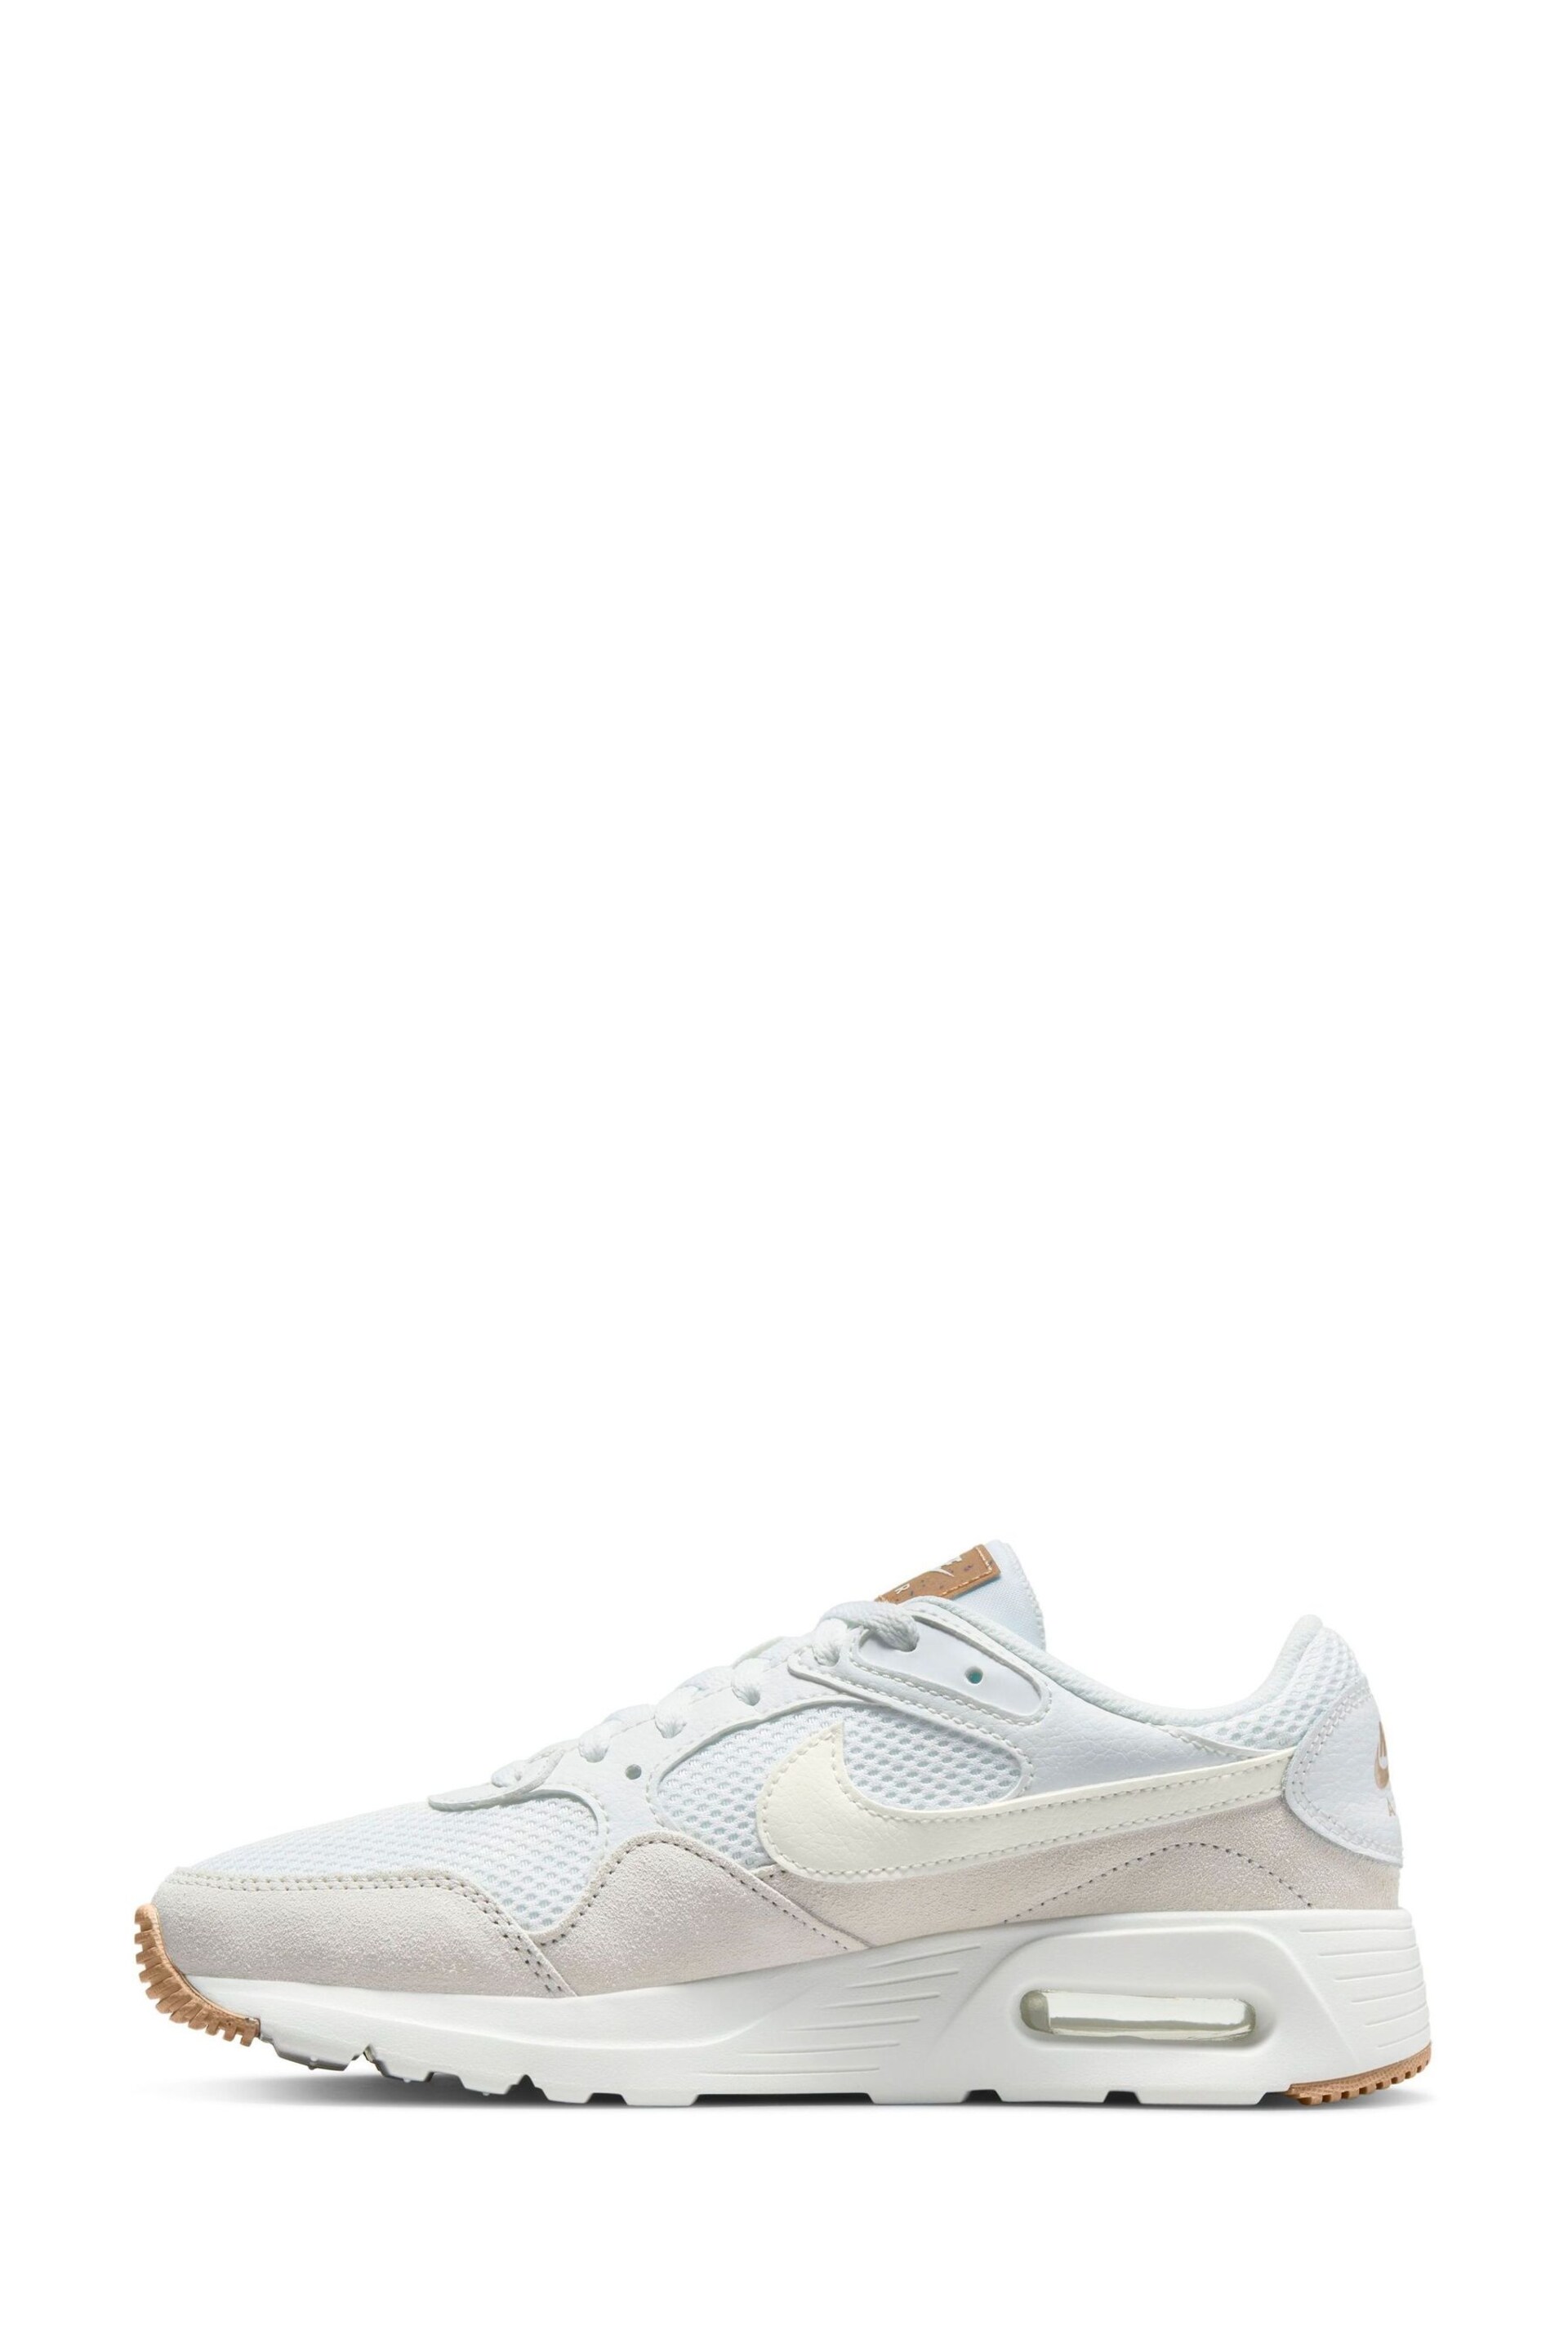 Nike White Air Max SC Trainers - Image 2 of 9